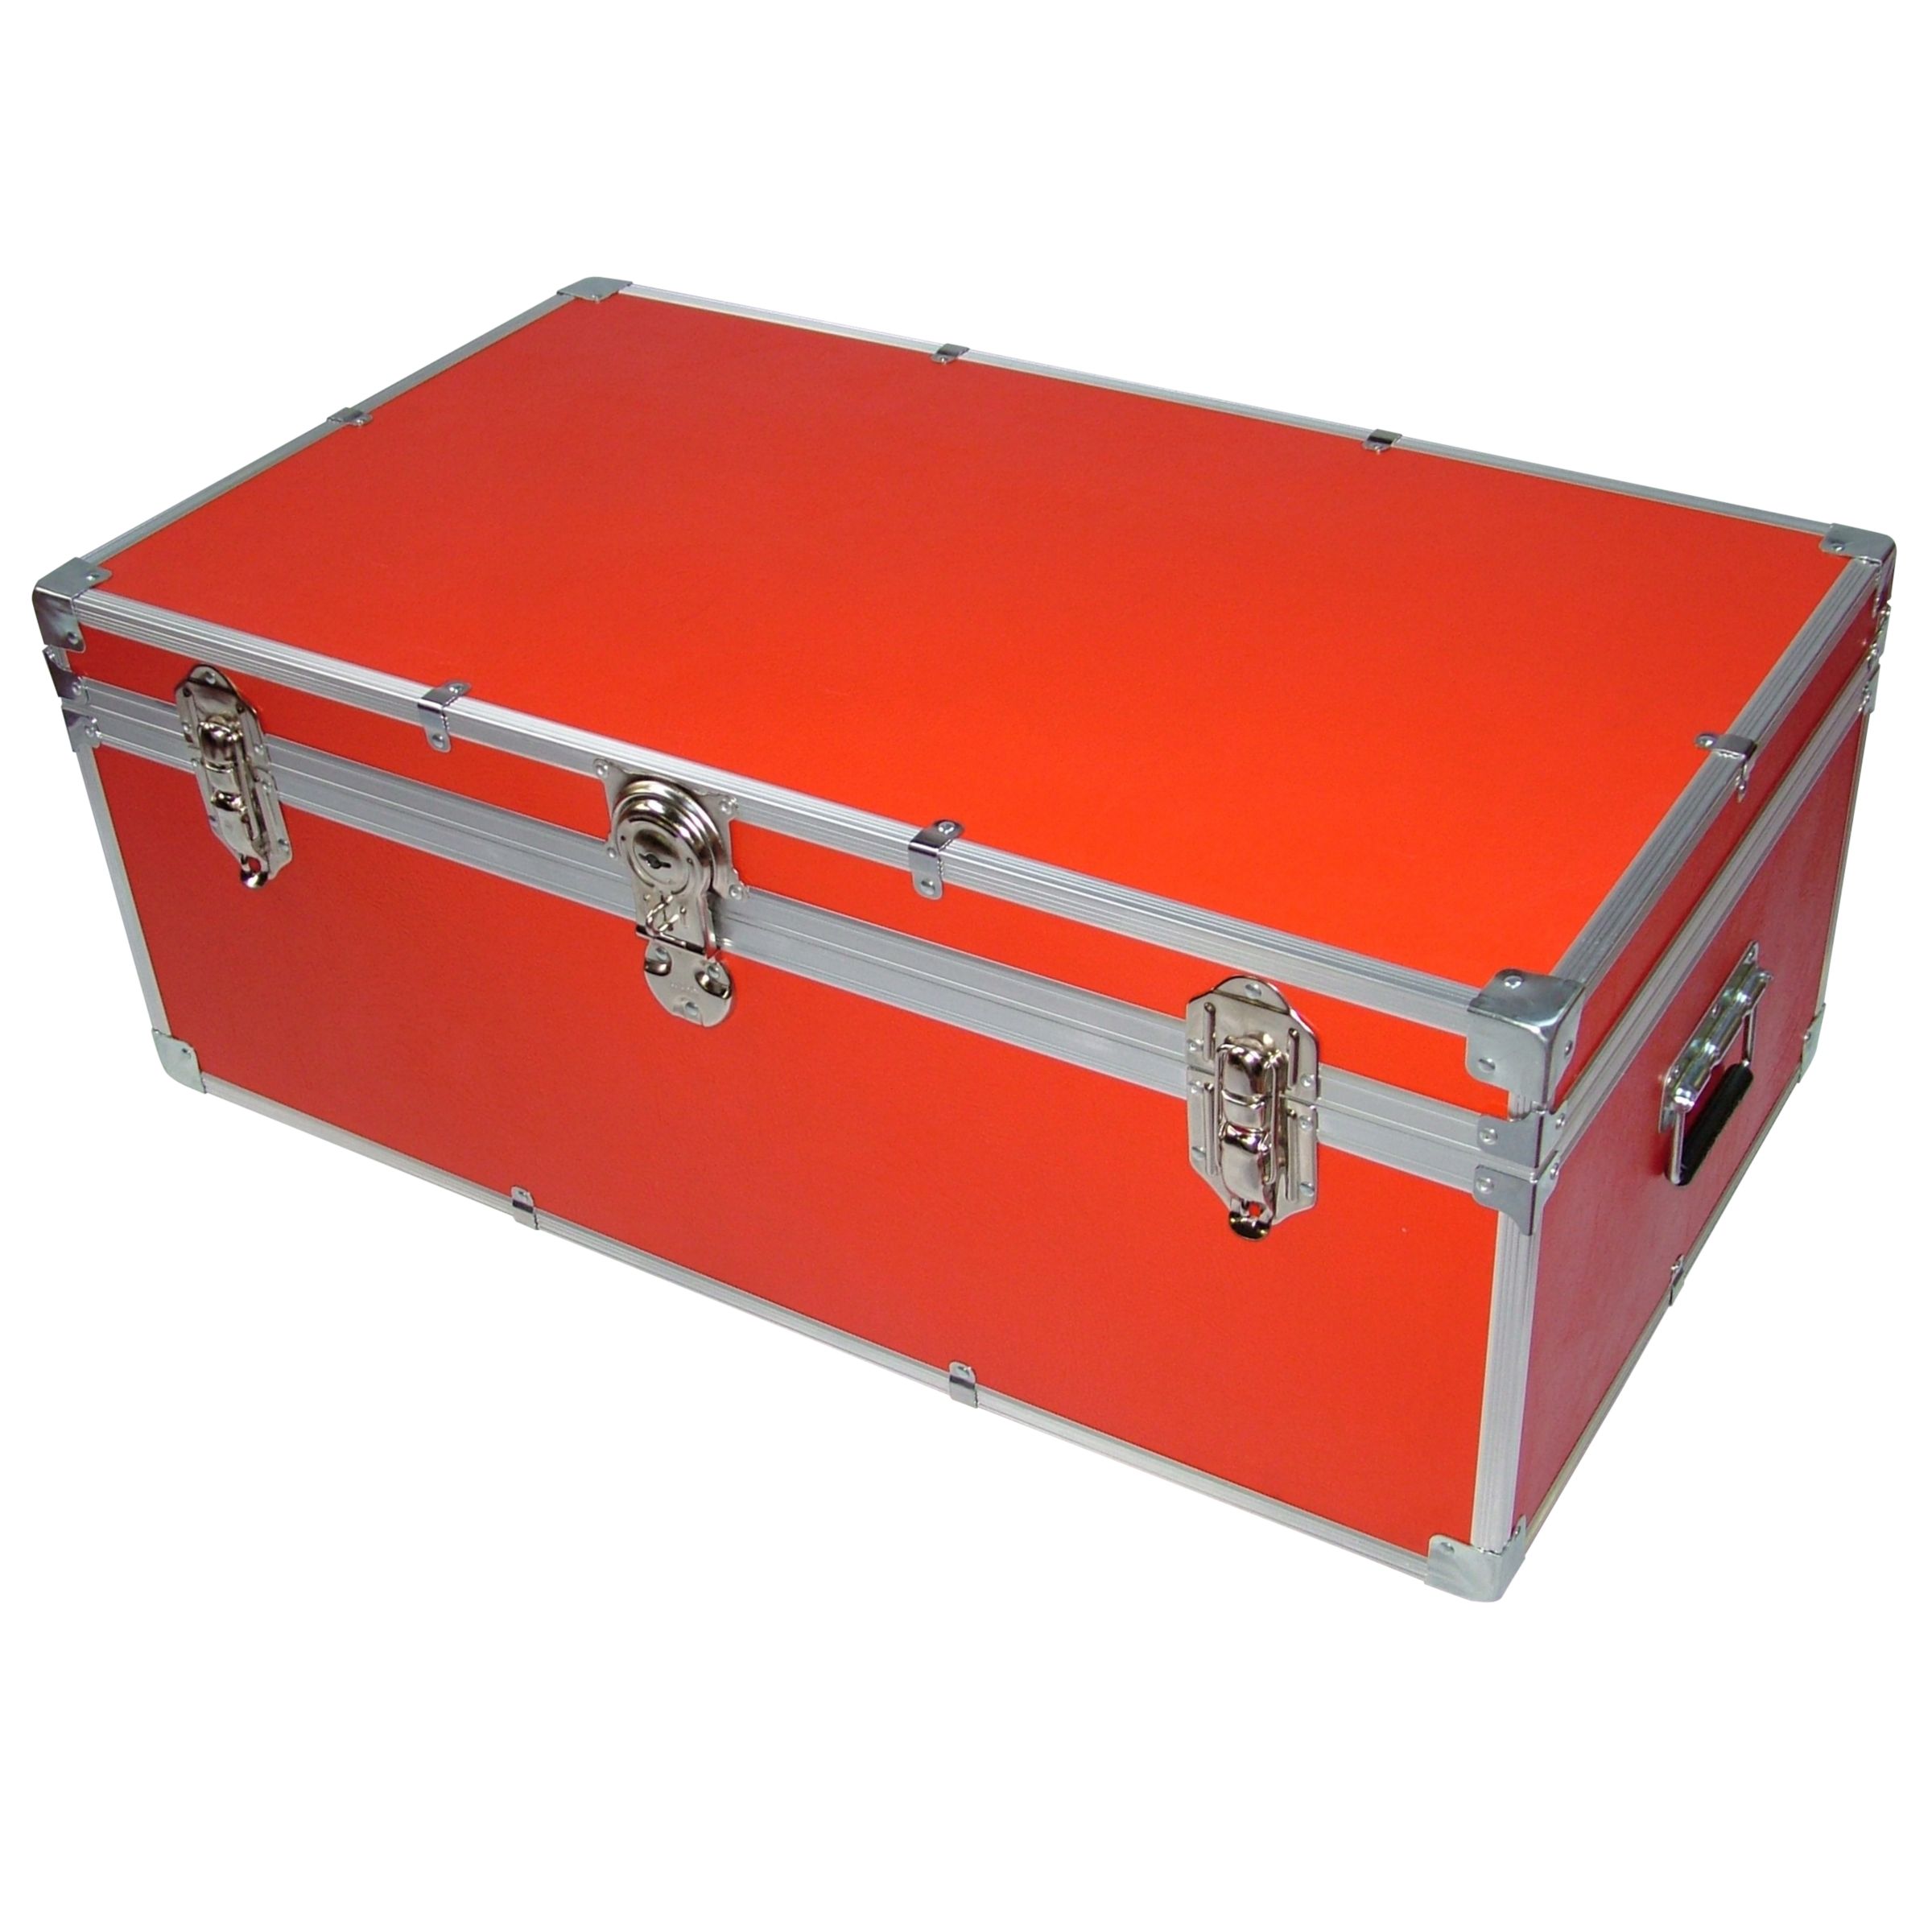 John Lewis Fortified Hand Trunk, Red at JohnLewis